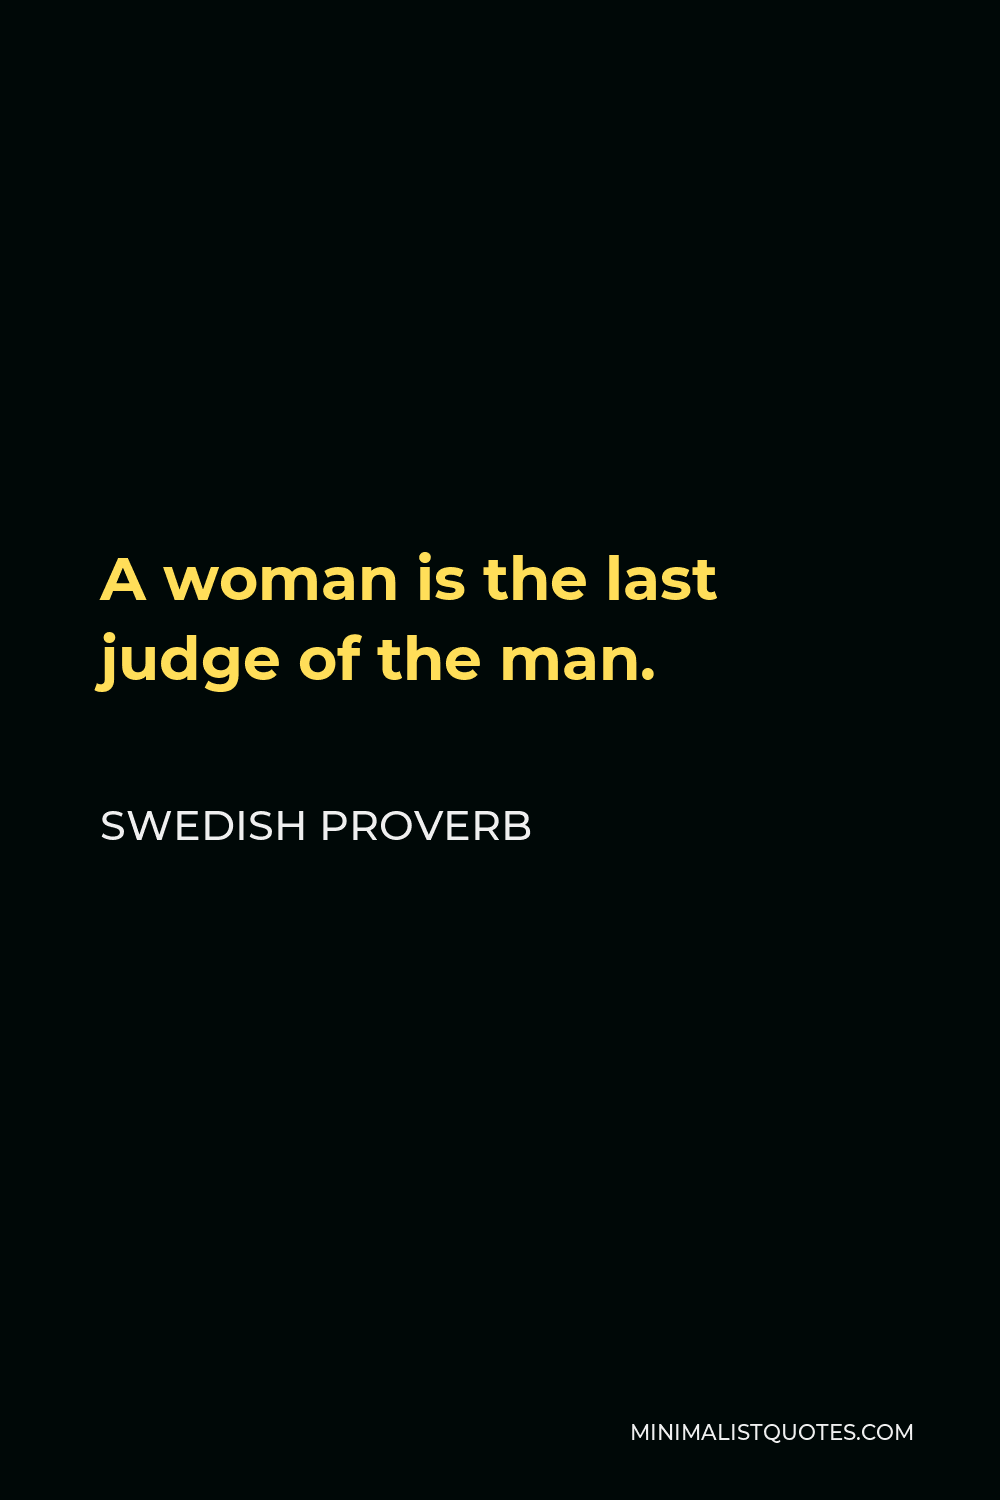 Swedish Proverb Quote - A woman is the last judge of the man.